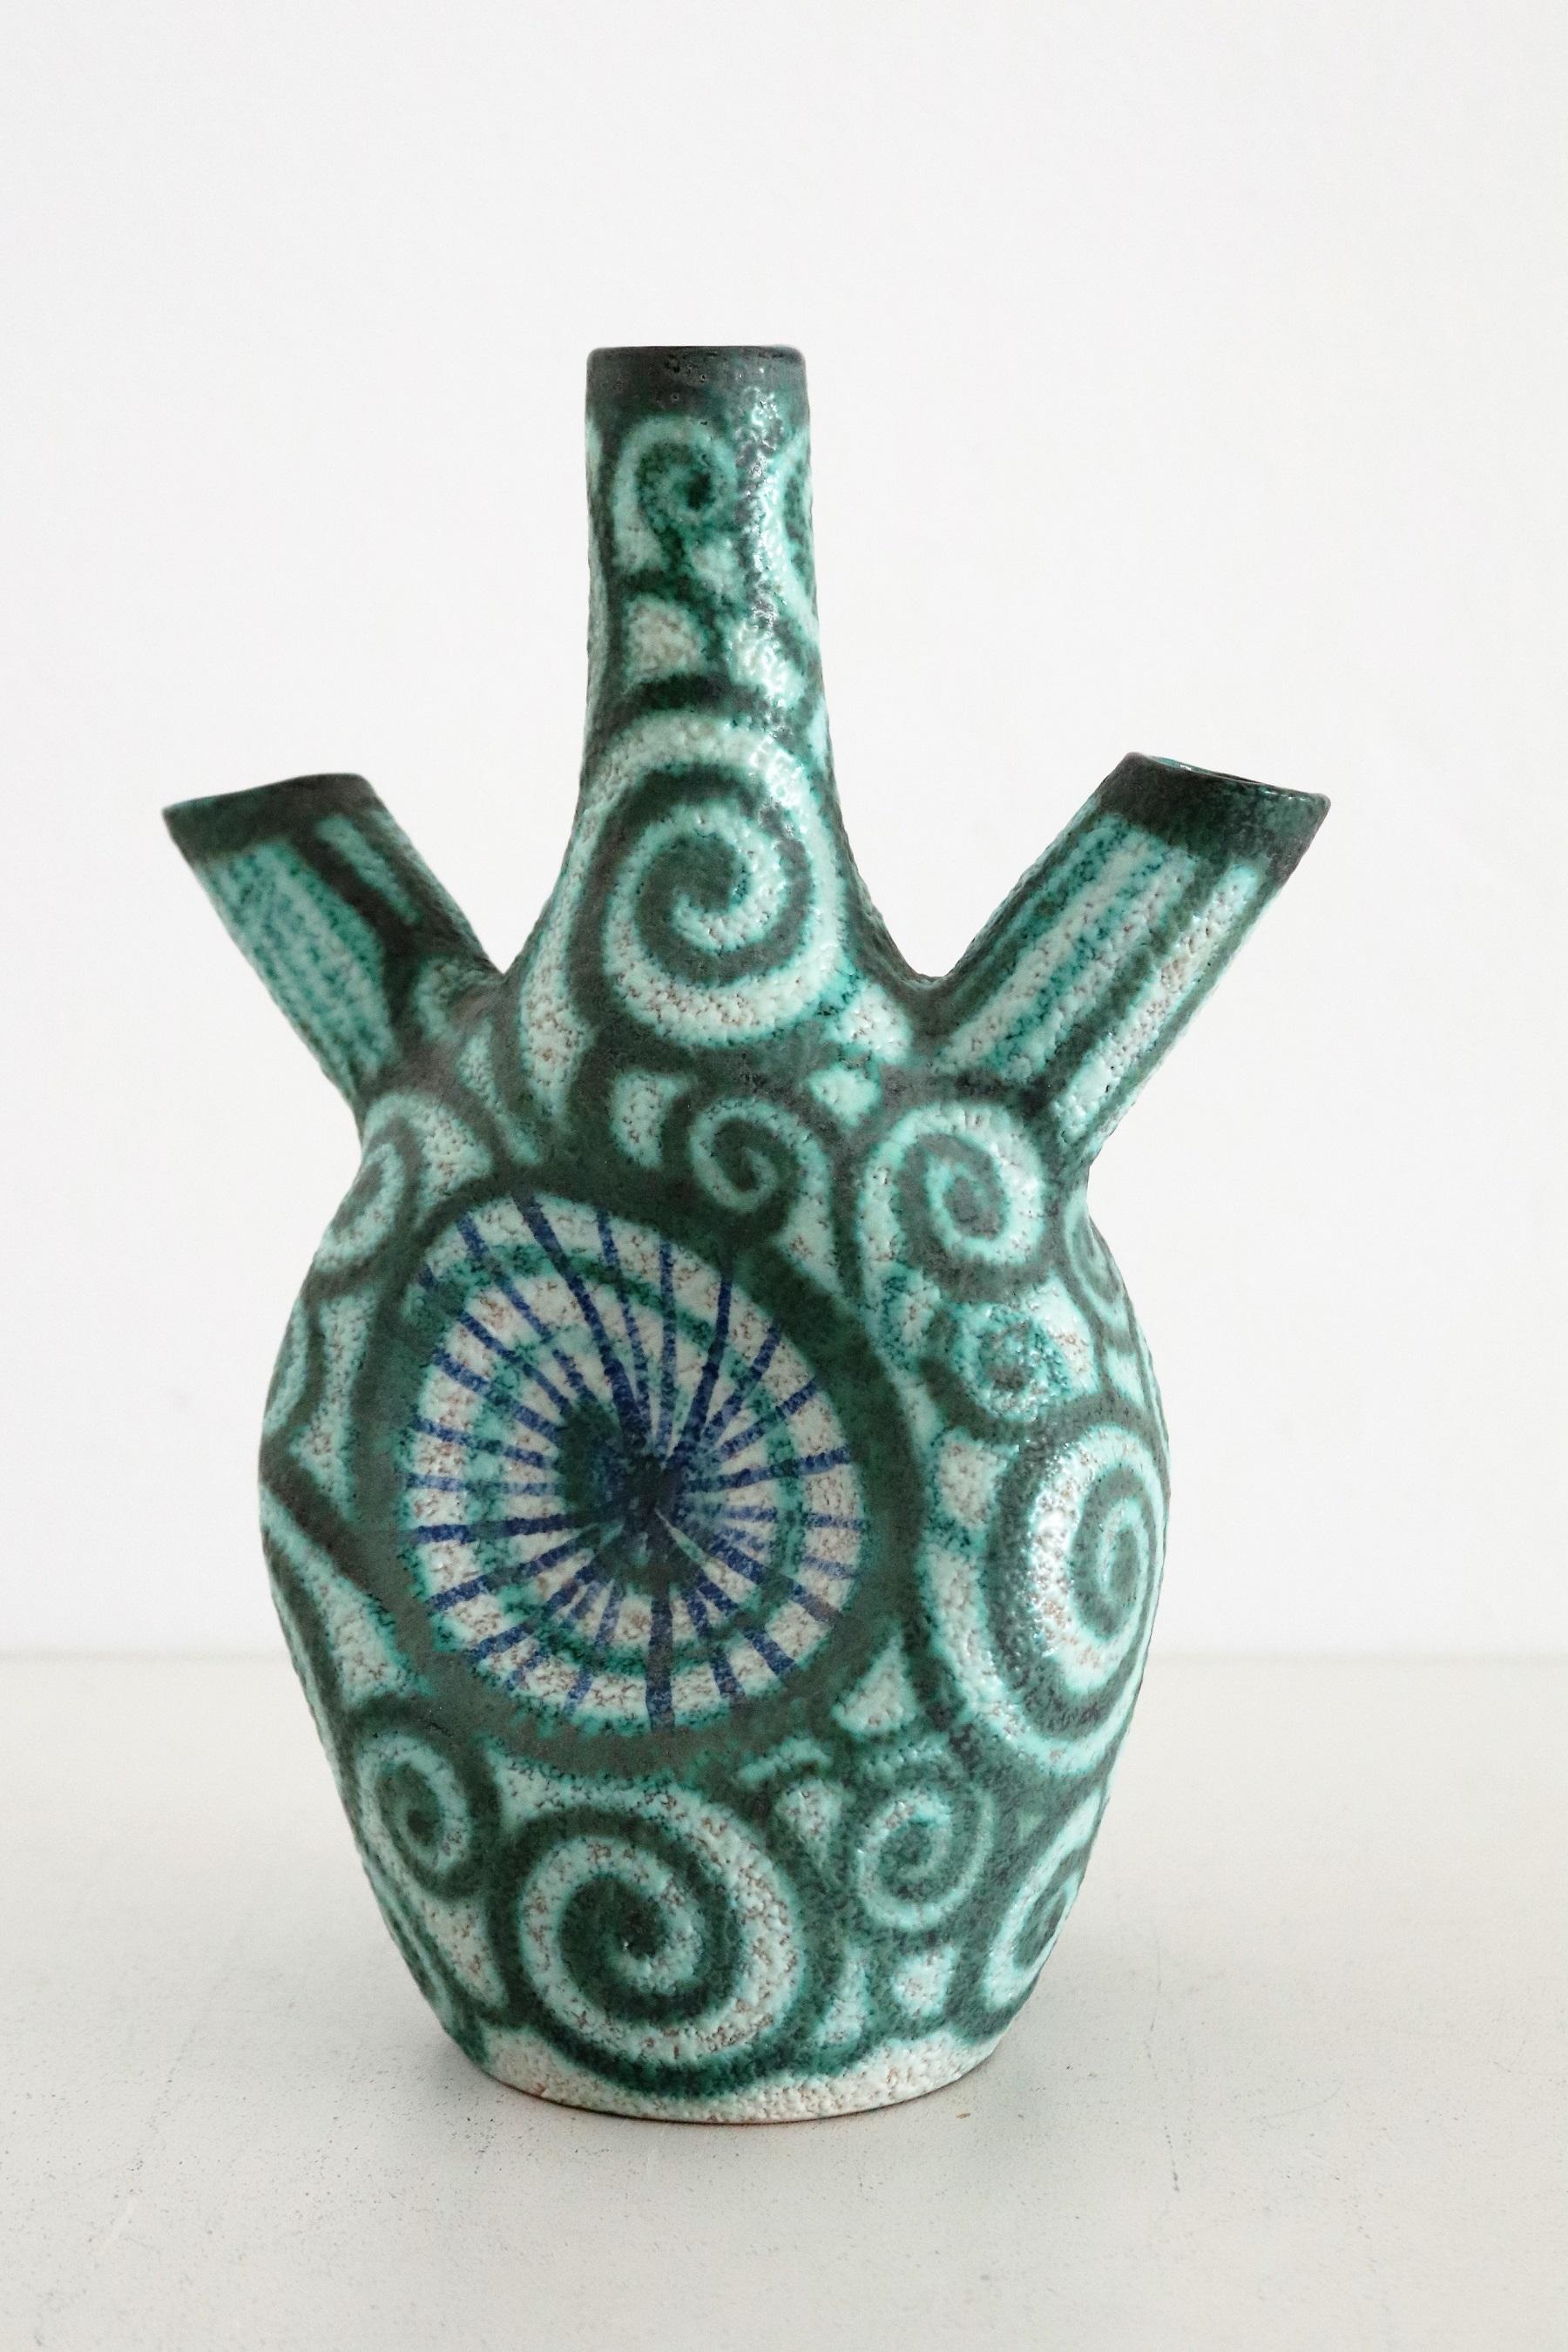 Hand-Crafted Giuseppe Barile Albisola Italian Midcentury Modern Pottery Vase, 1950s For Sale